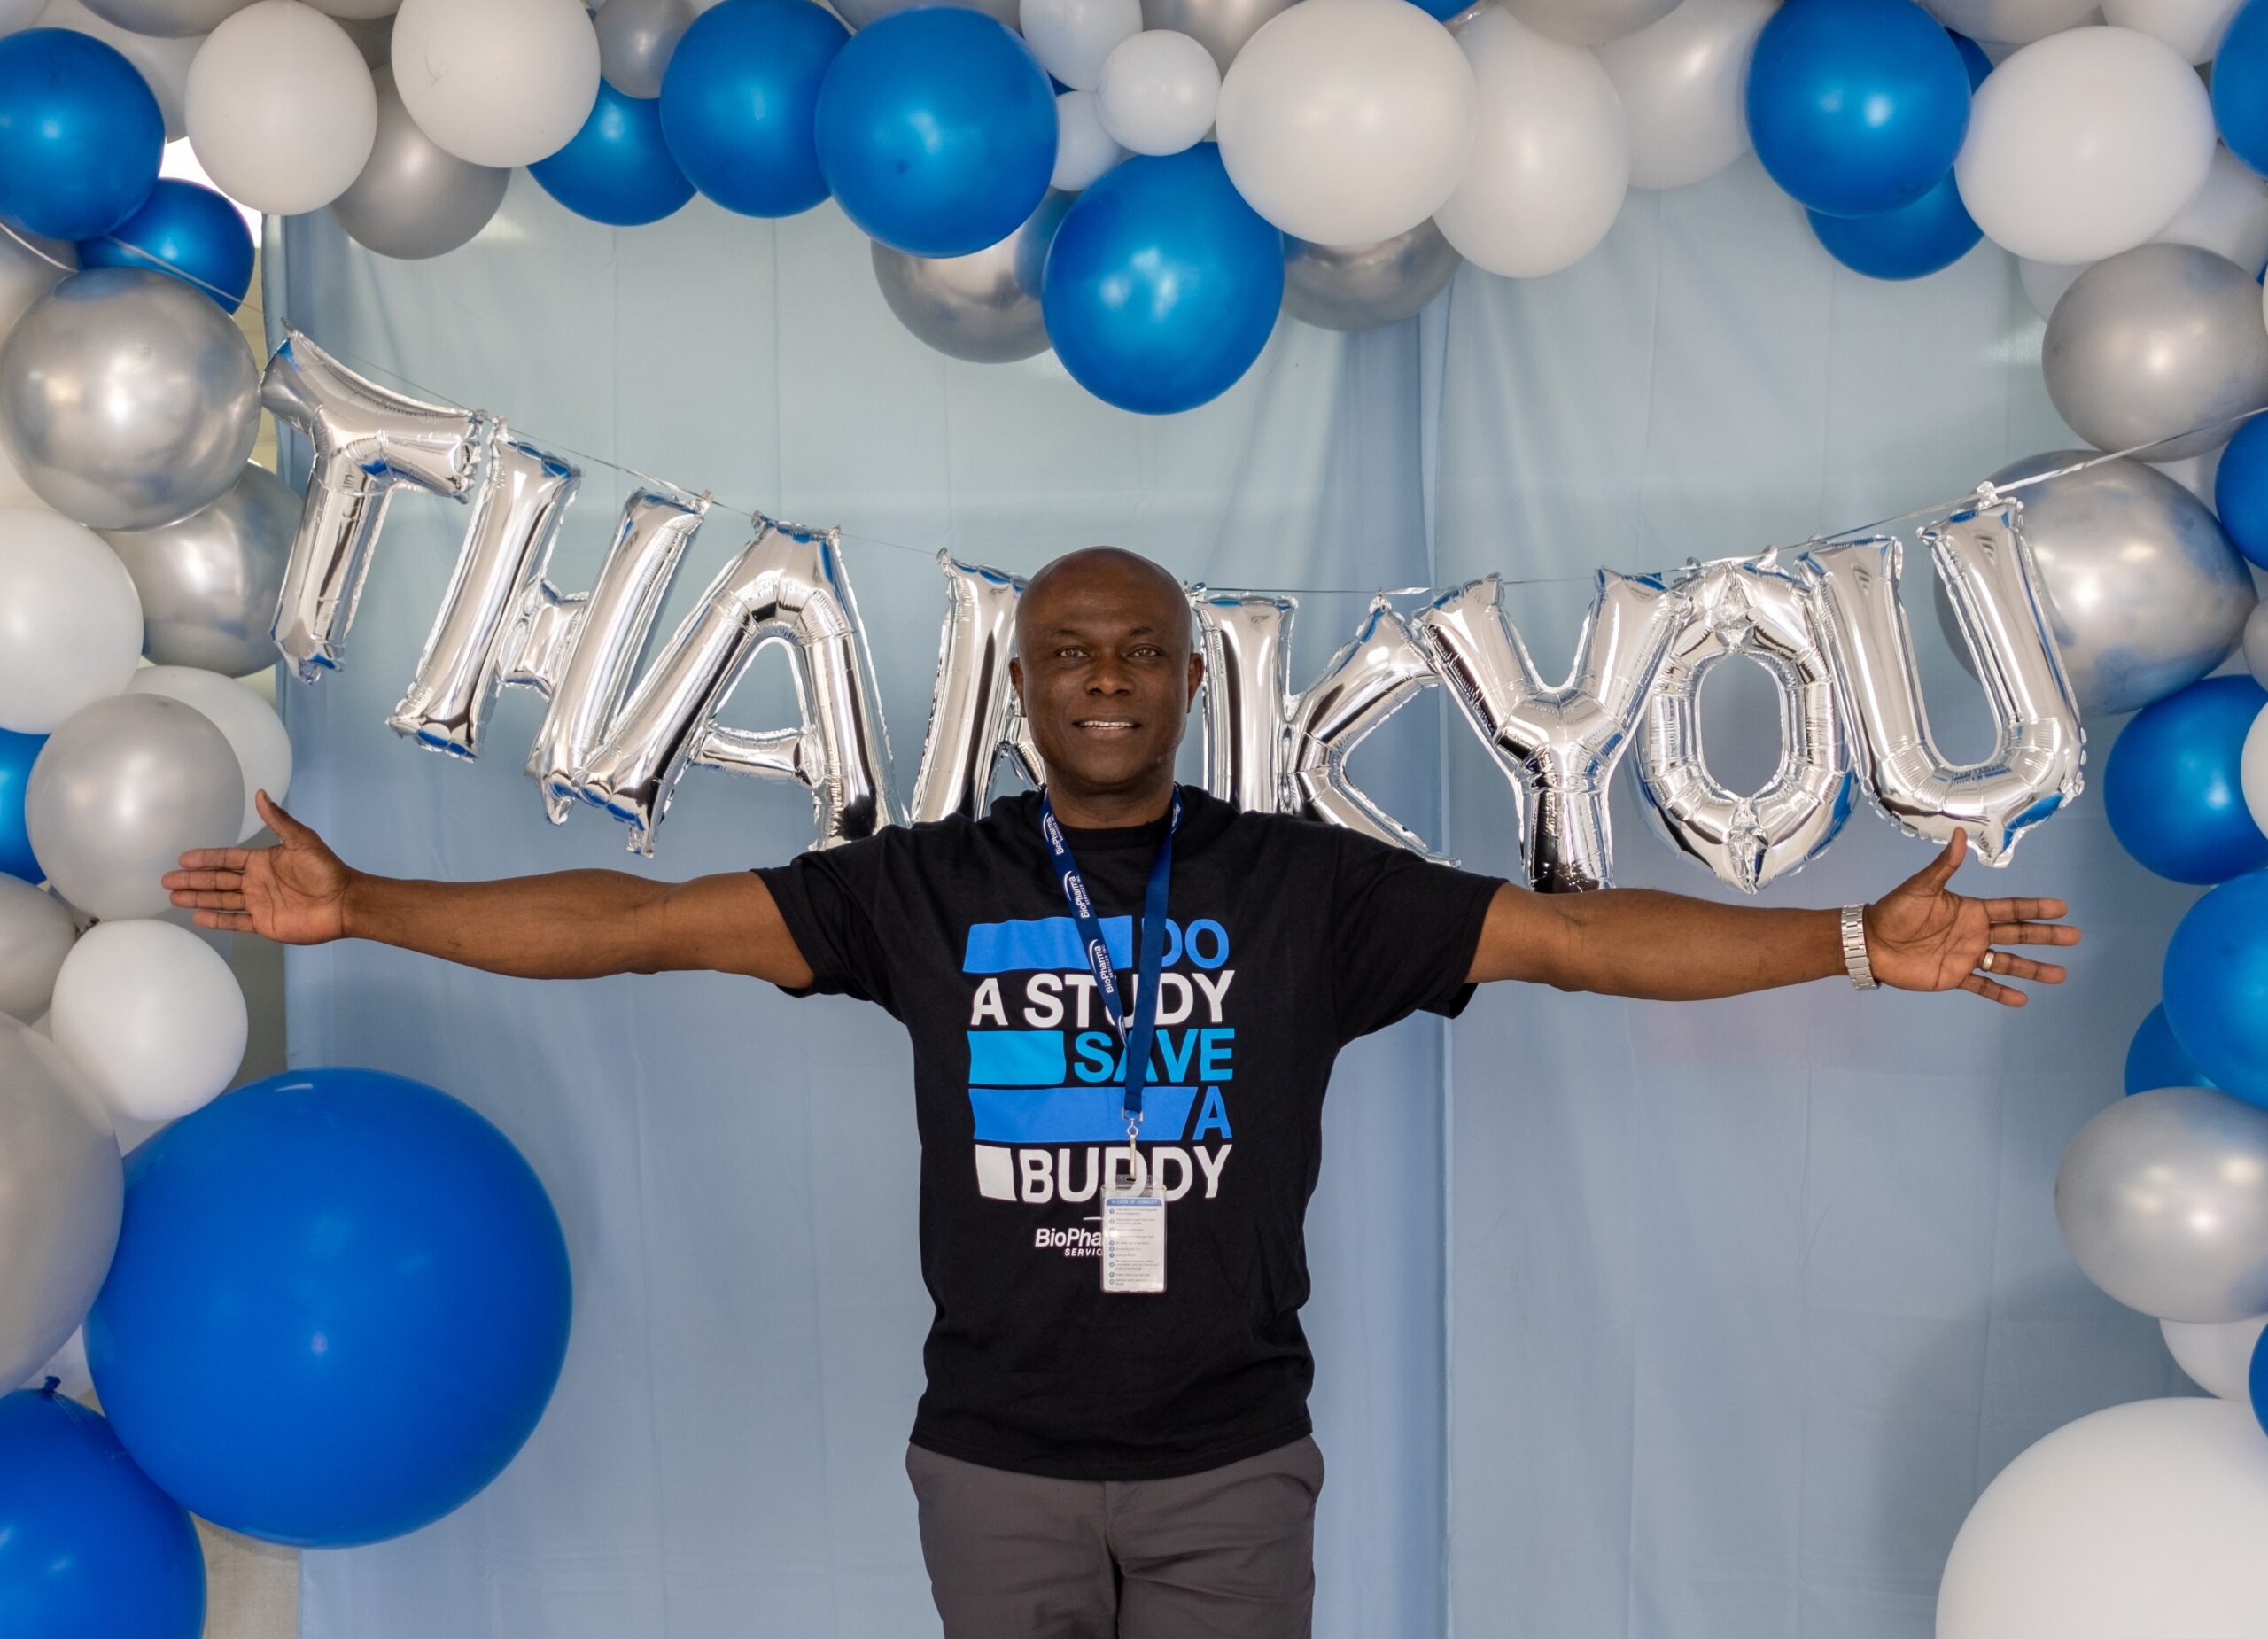 Person with open arms in front of a "Thank You" sign made of balloons